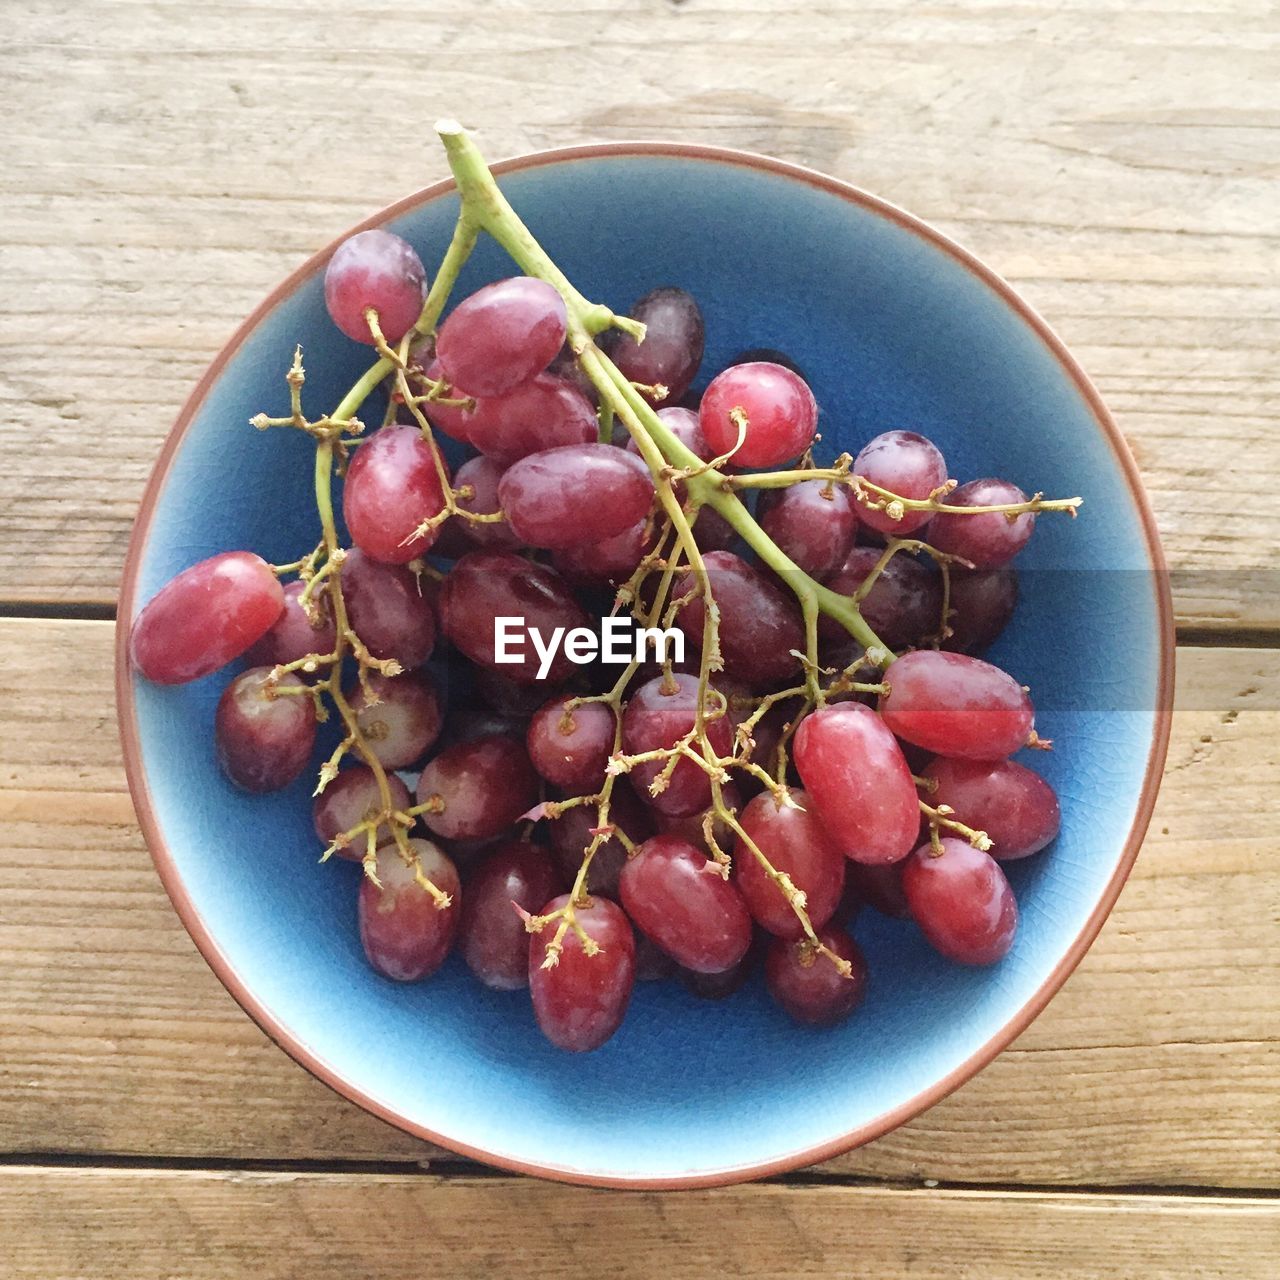 CLOSE-UP OF GRAPES IN BOWL